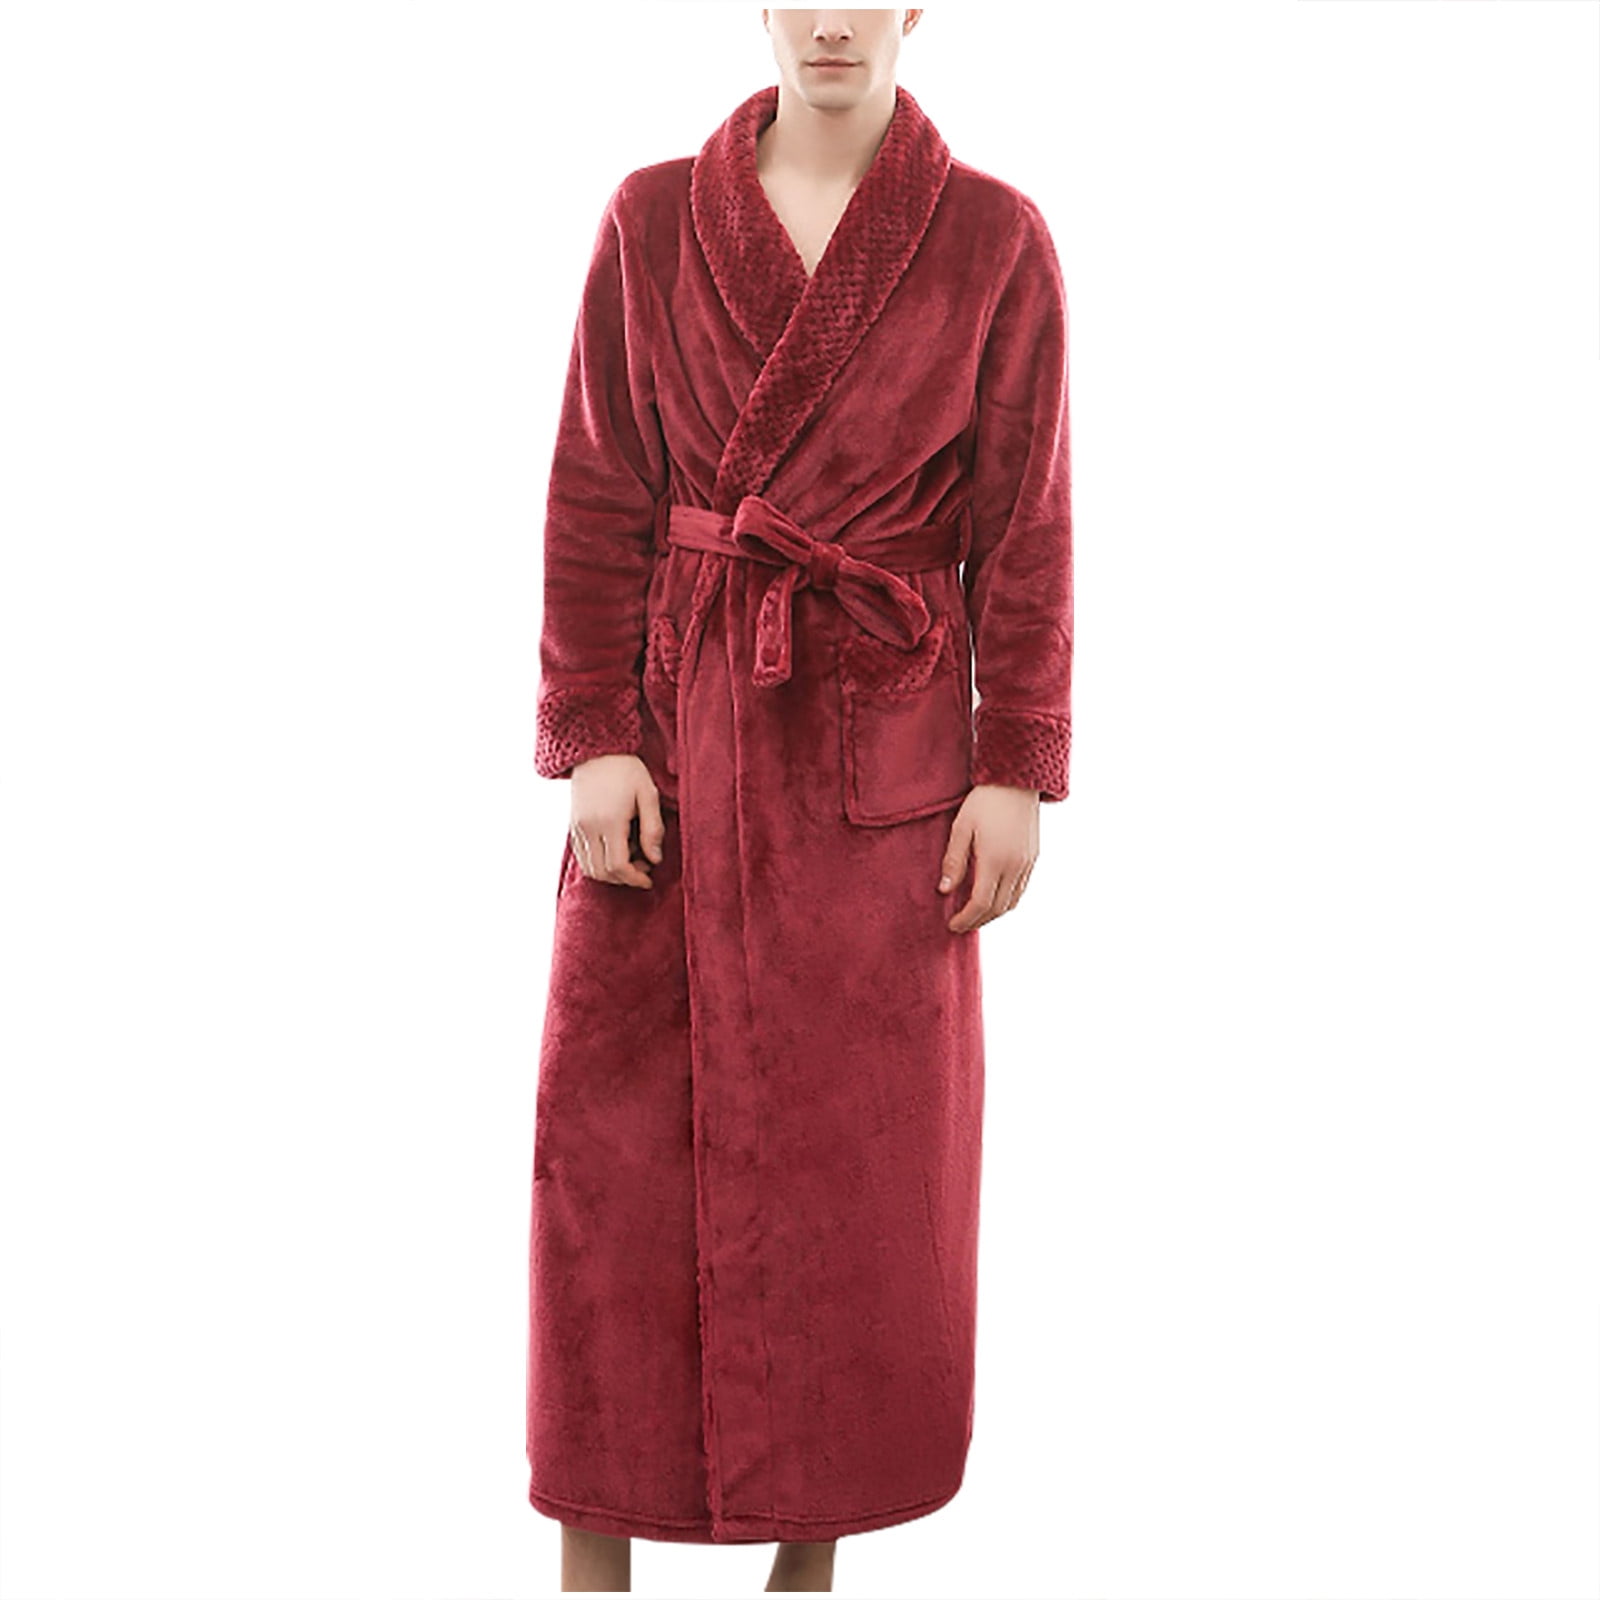 DiaryLook Fluffy Ladies Dressing Gown with Hooded, Super Soft Loungewear  Robe for Women, Dressing Gowns for Women UK Bathrobe : Amazon.co.uk: Fashion